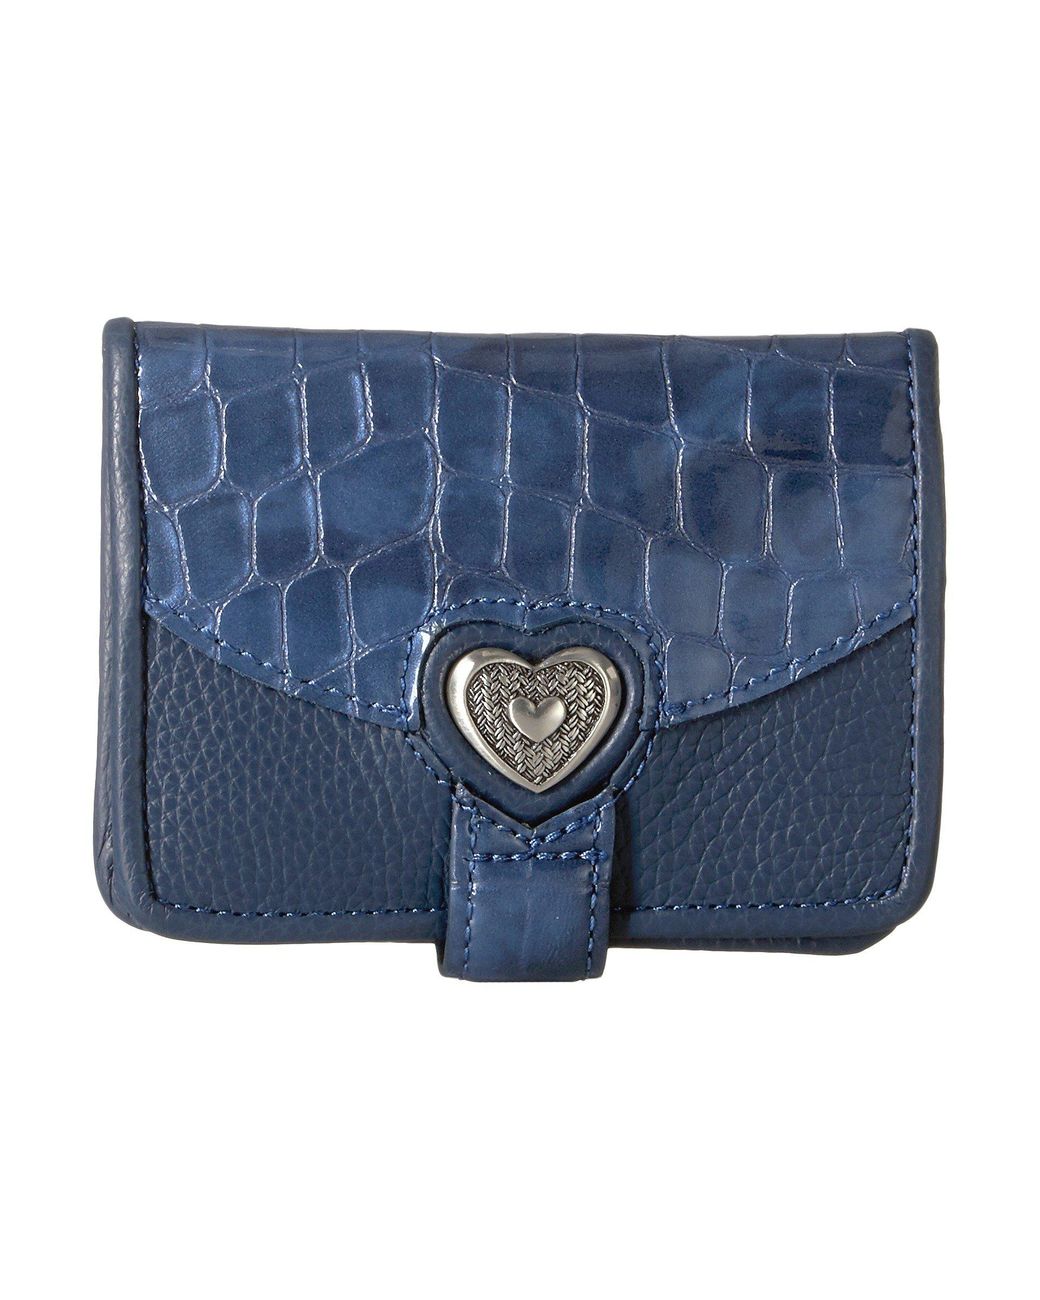 Brighton Bellissimo Heart Small Wallet - Black/Chocolate - Stages West